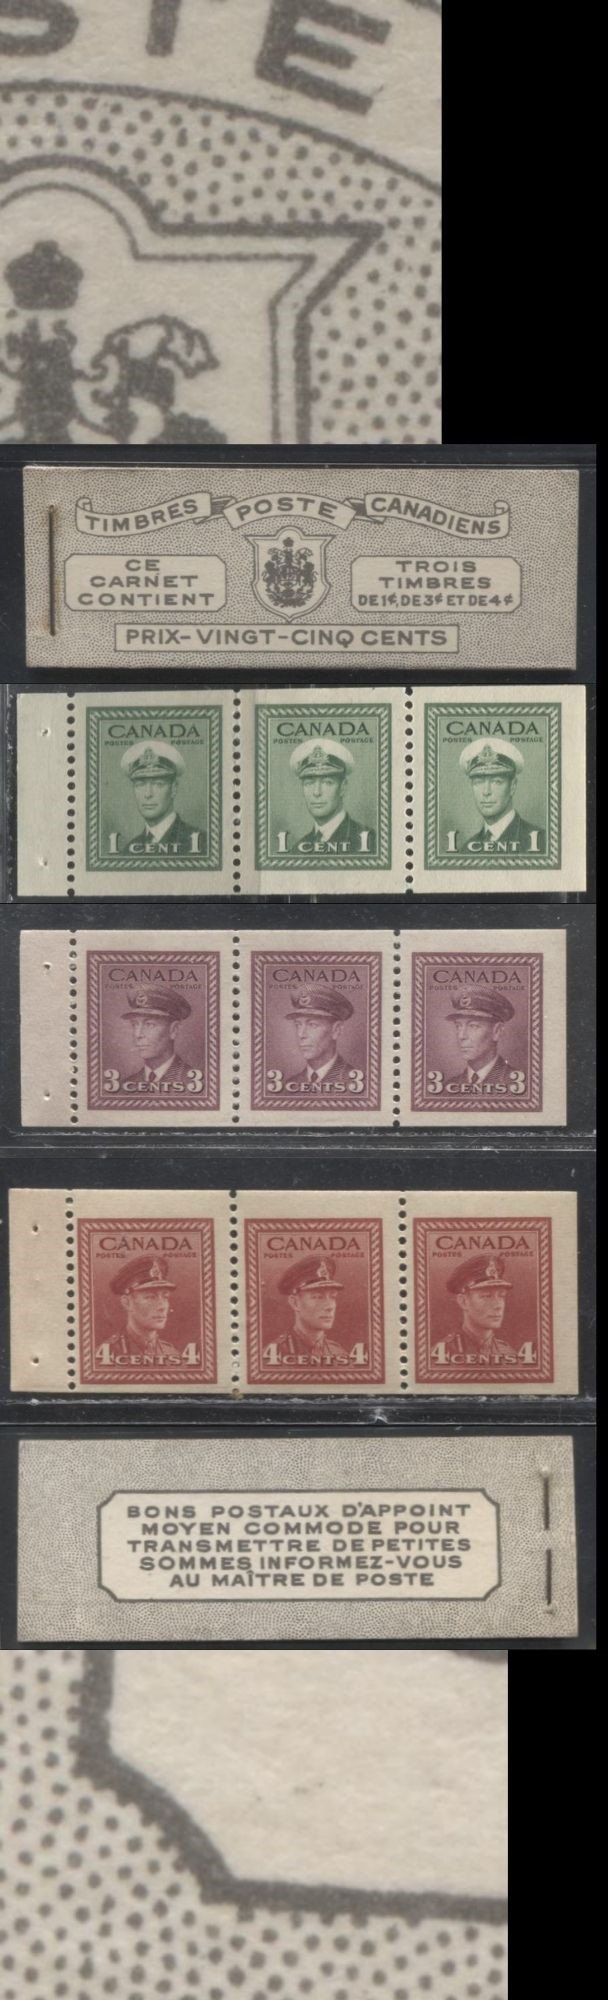 Lot 210 Canada #BK38a 1942-1949 War Issue Complete 25c, French Booklet Containing 1 Pane Each of 3 of 1c Green, 3c Rosy Plum and 4c Carmine Red, Harris Front Cover Type Vg , Back Cover Jvi, 7c & 6c Rate Page